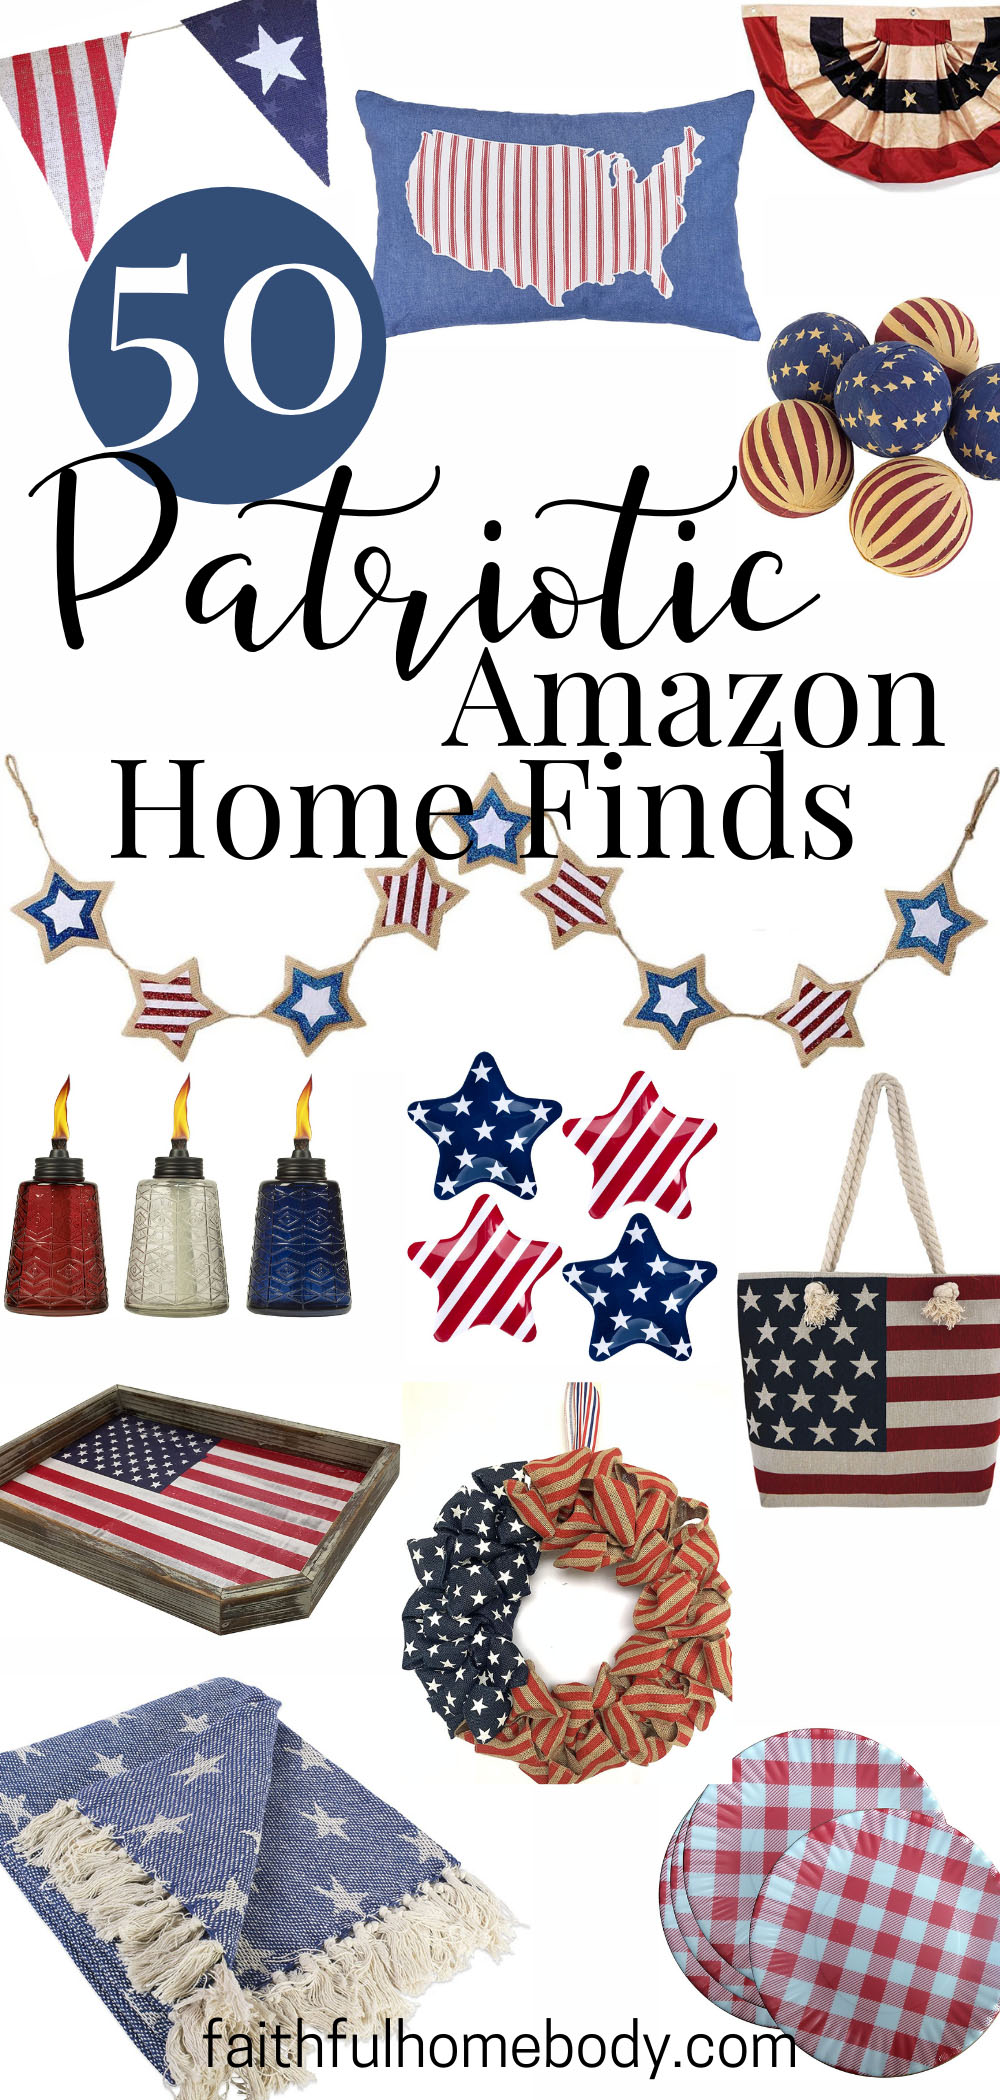 50 patriotic Amazon home finds. Reds, whites, and blues. Amazon-Must-Haves. Memorial Day | 4th of July | Veteran's Day | Flag Day | USA